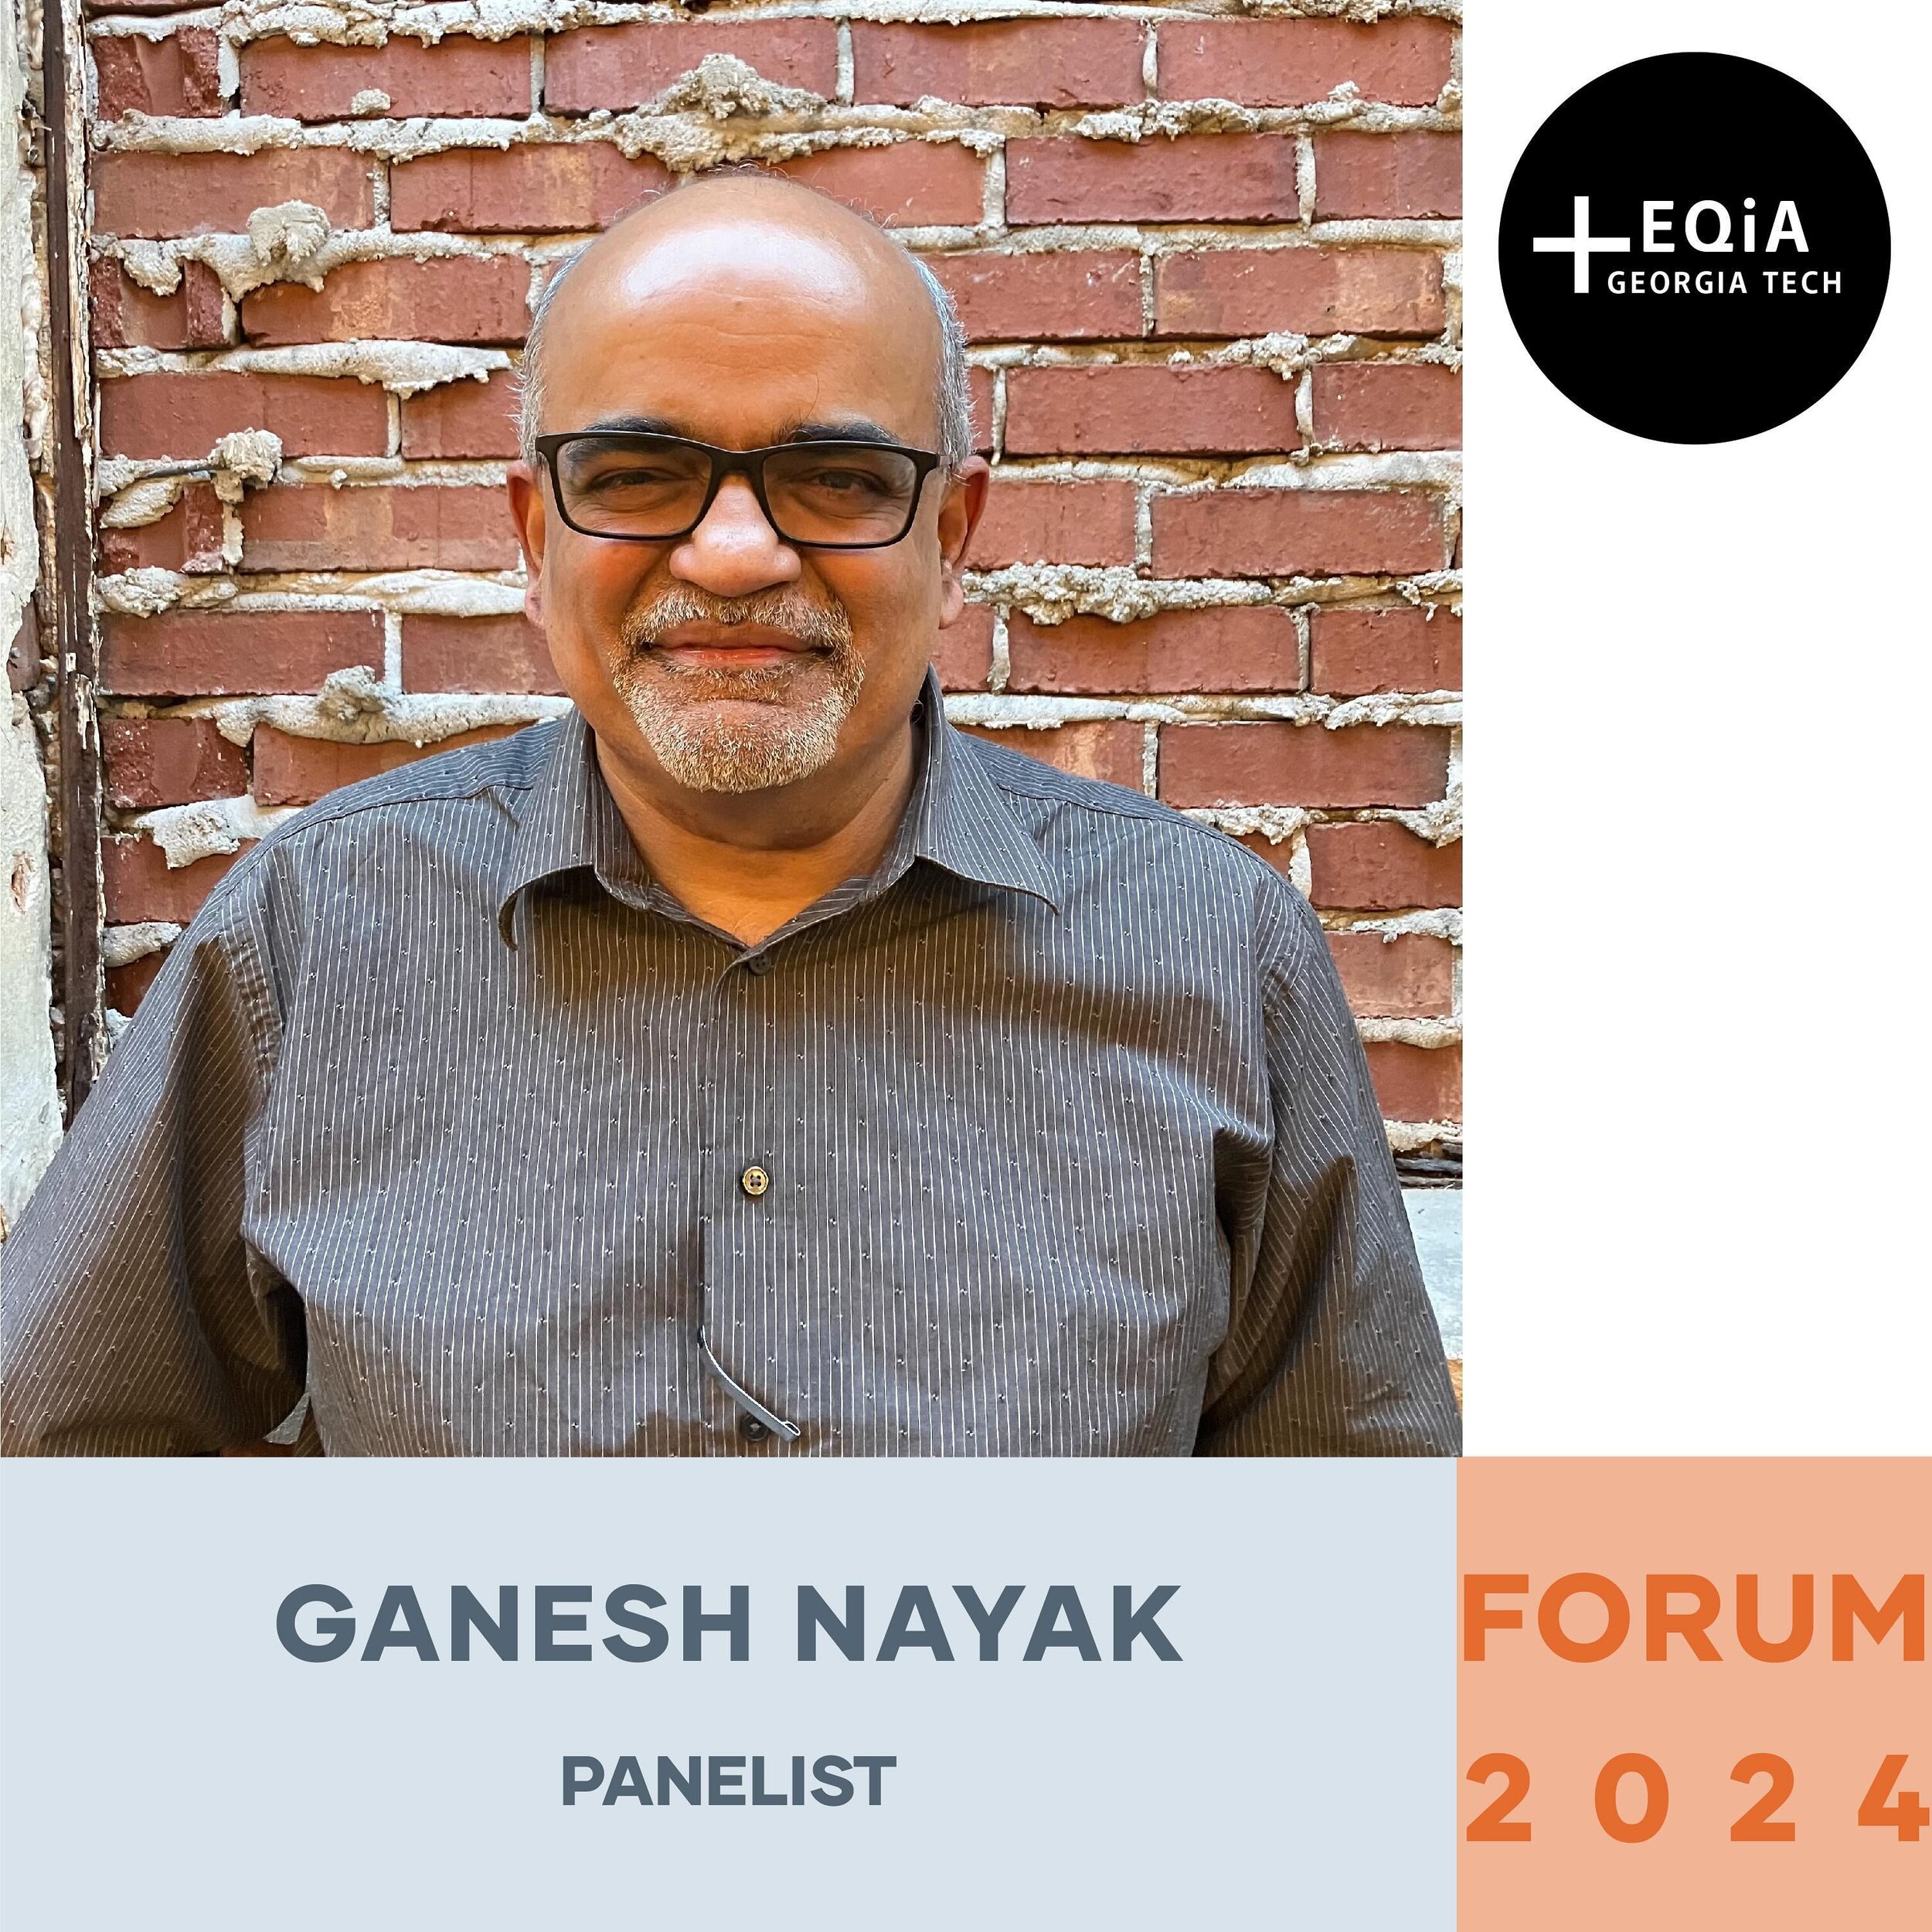 ⭐️ FORUM PANELIST ⭐️ 

Ganesh Nayak, AIA, NOMA founded Metier Inc. in Atlanta, GA consulting on sustainable design and accessibility. Growing up in India, he did his undergraduate studies in architecture before acquiring a graduate degree from Kansas